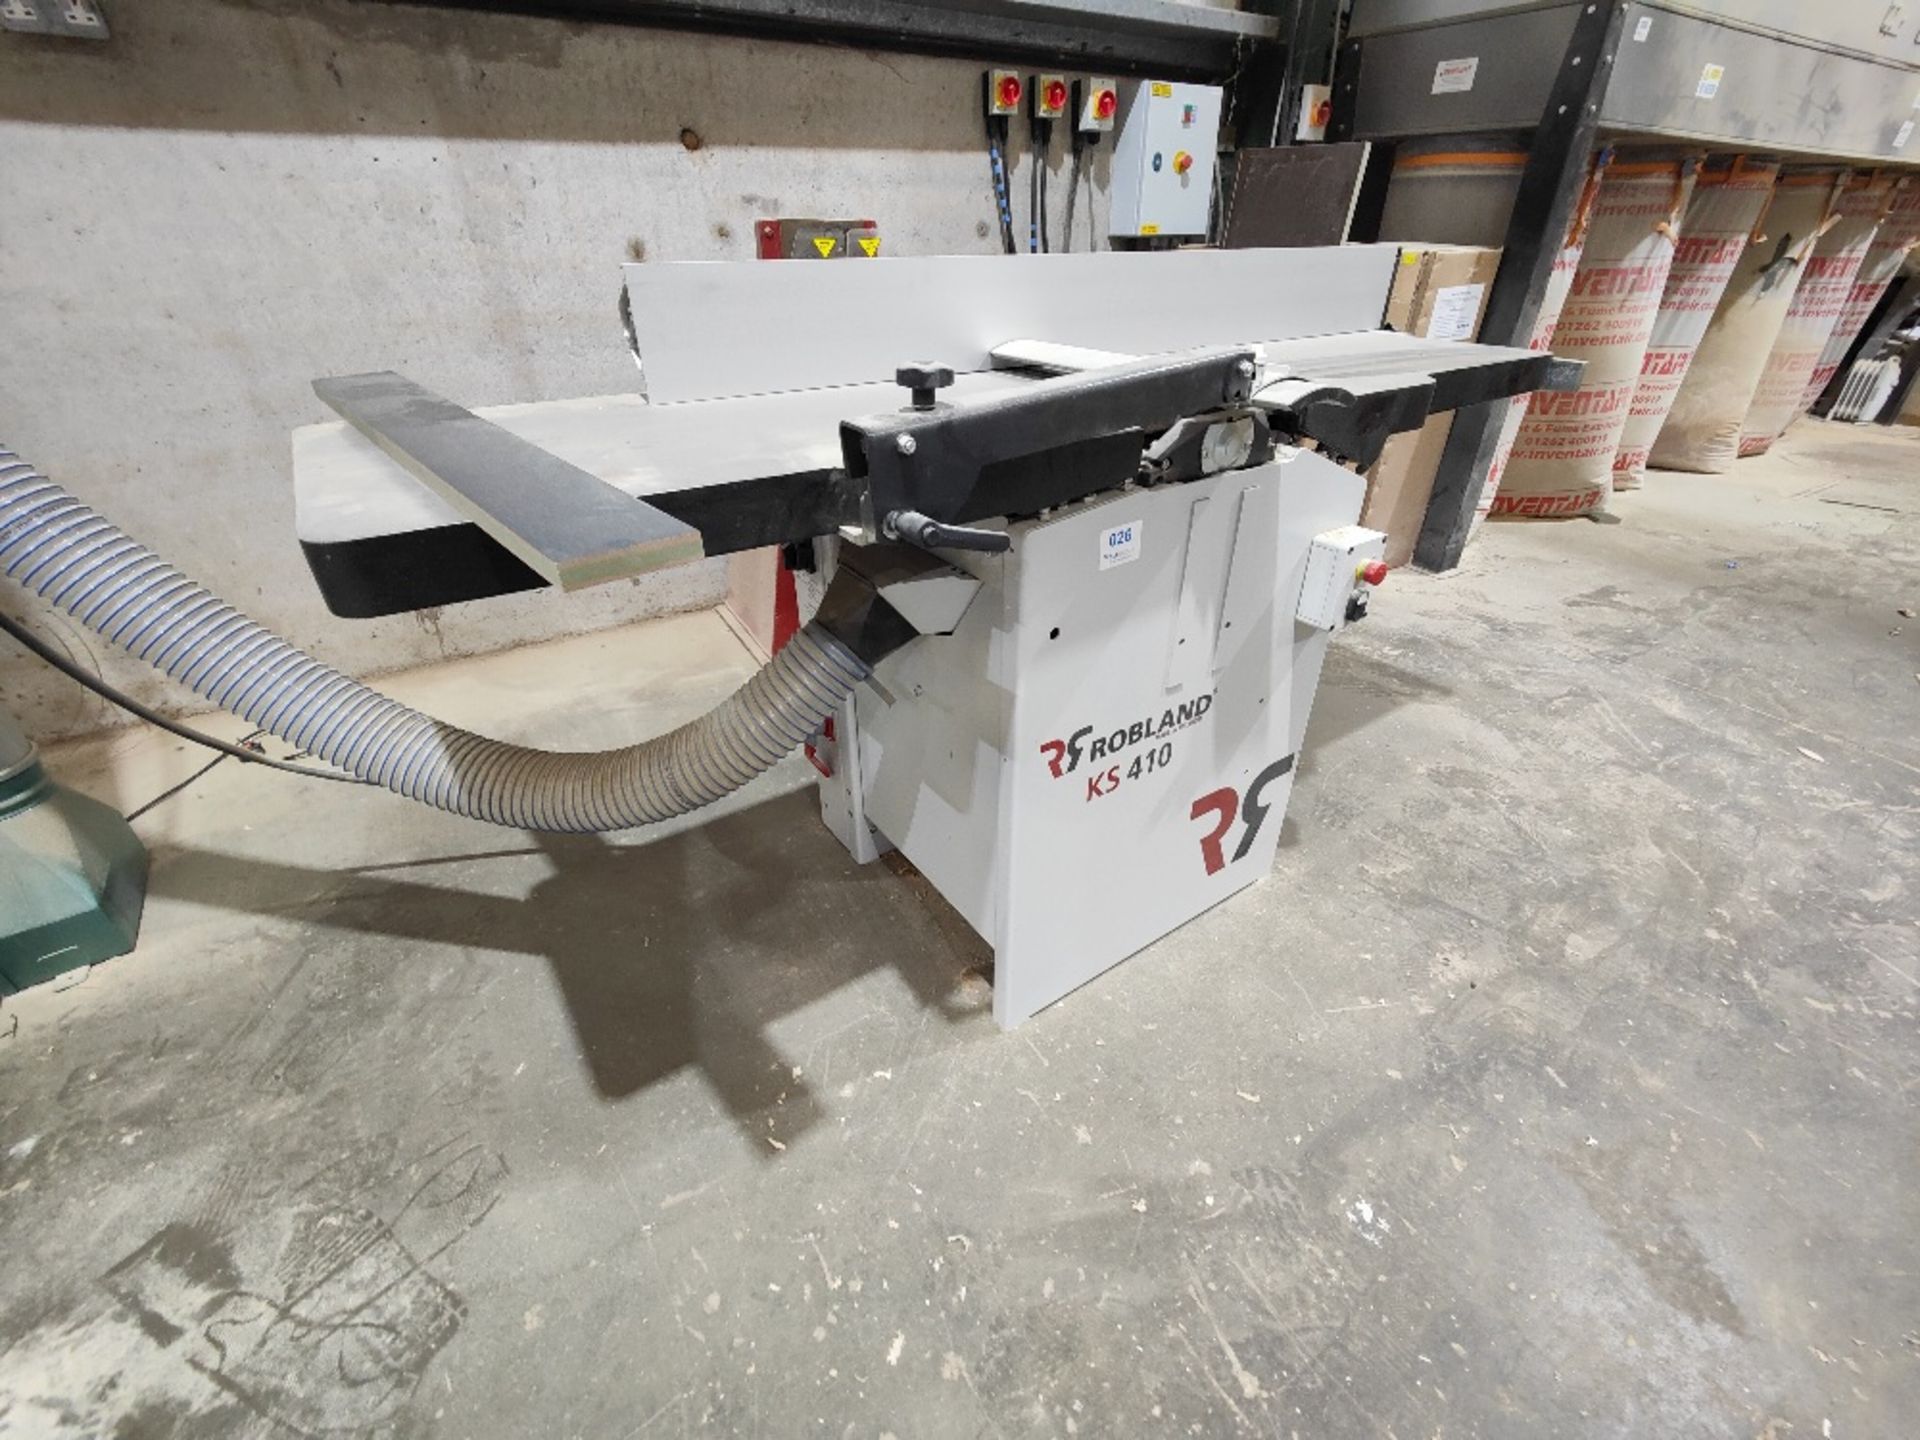 Robland KS410 Surface planer (2020) - Image 3 of 5